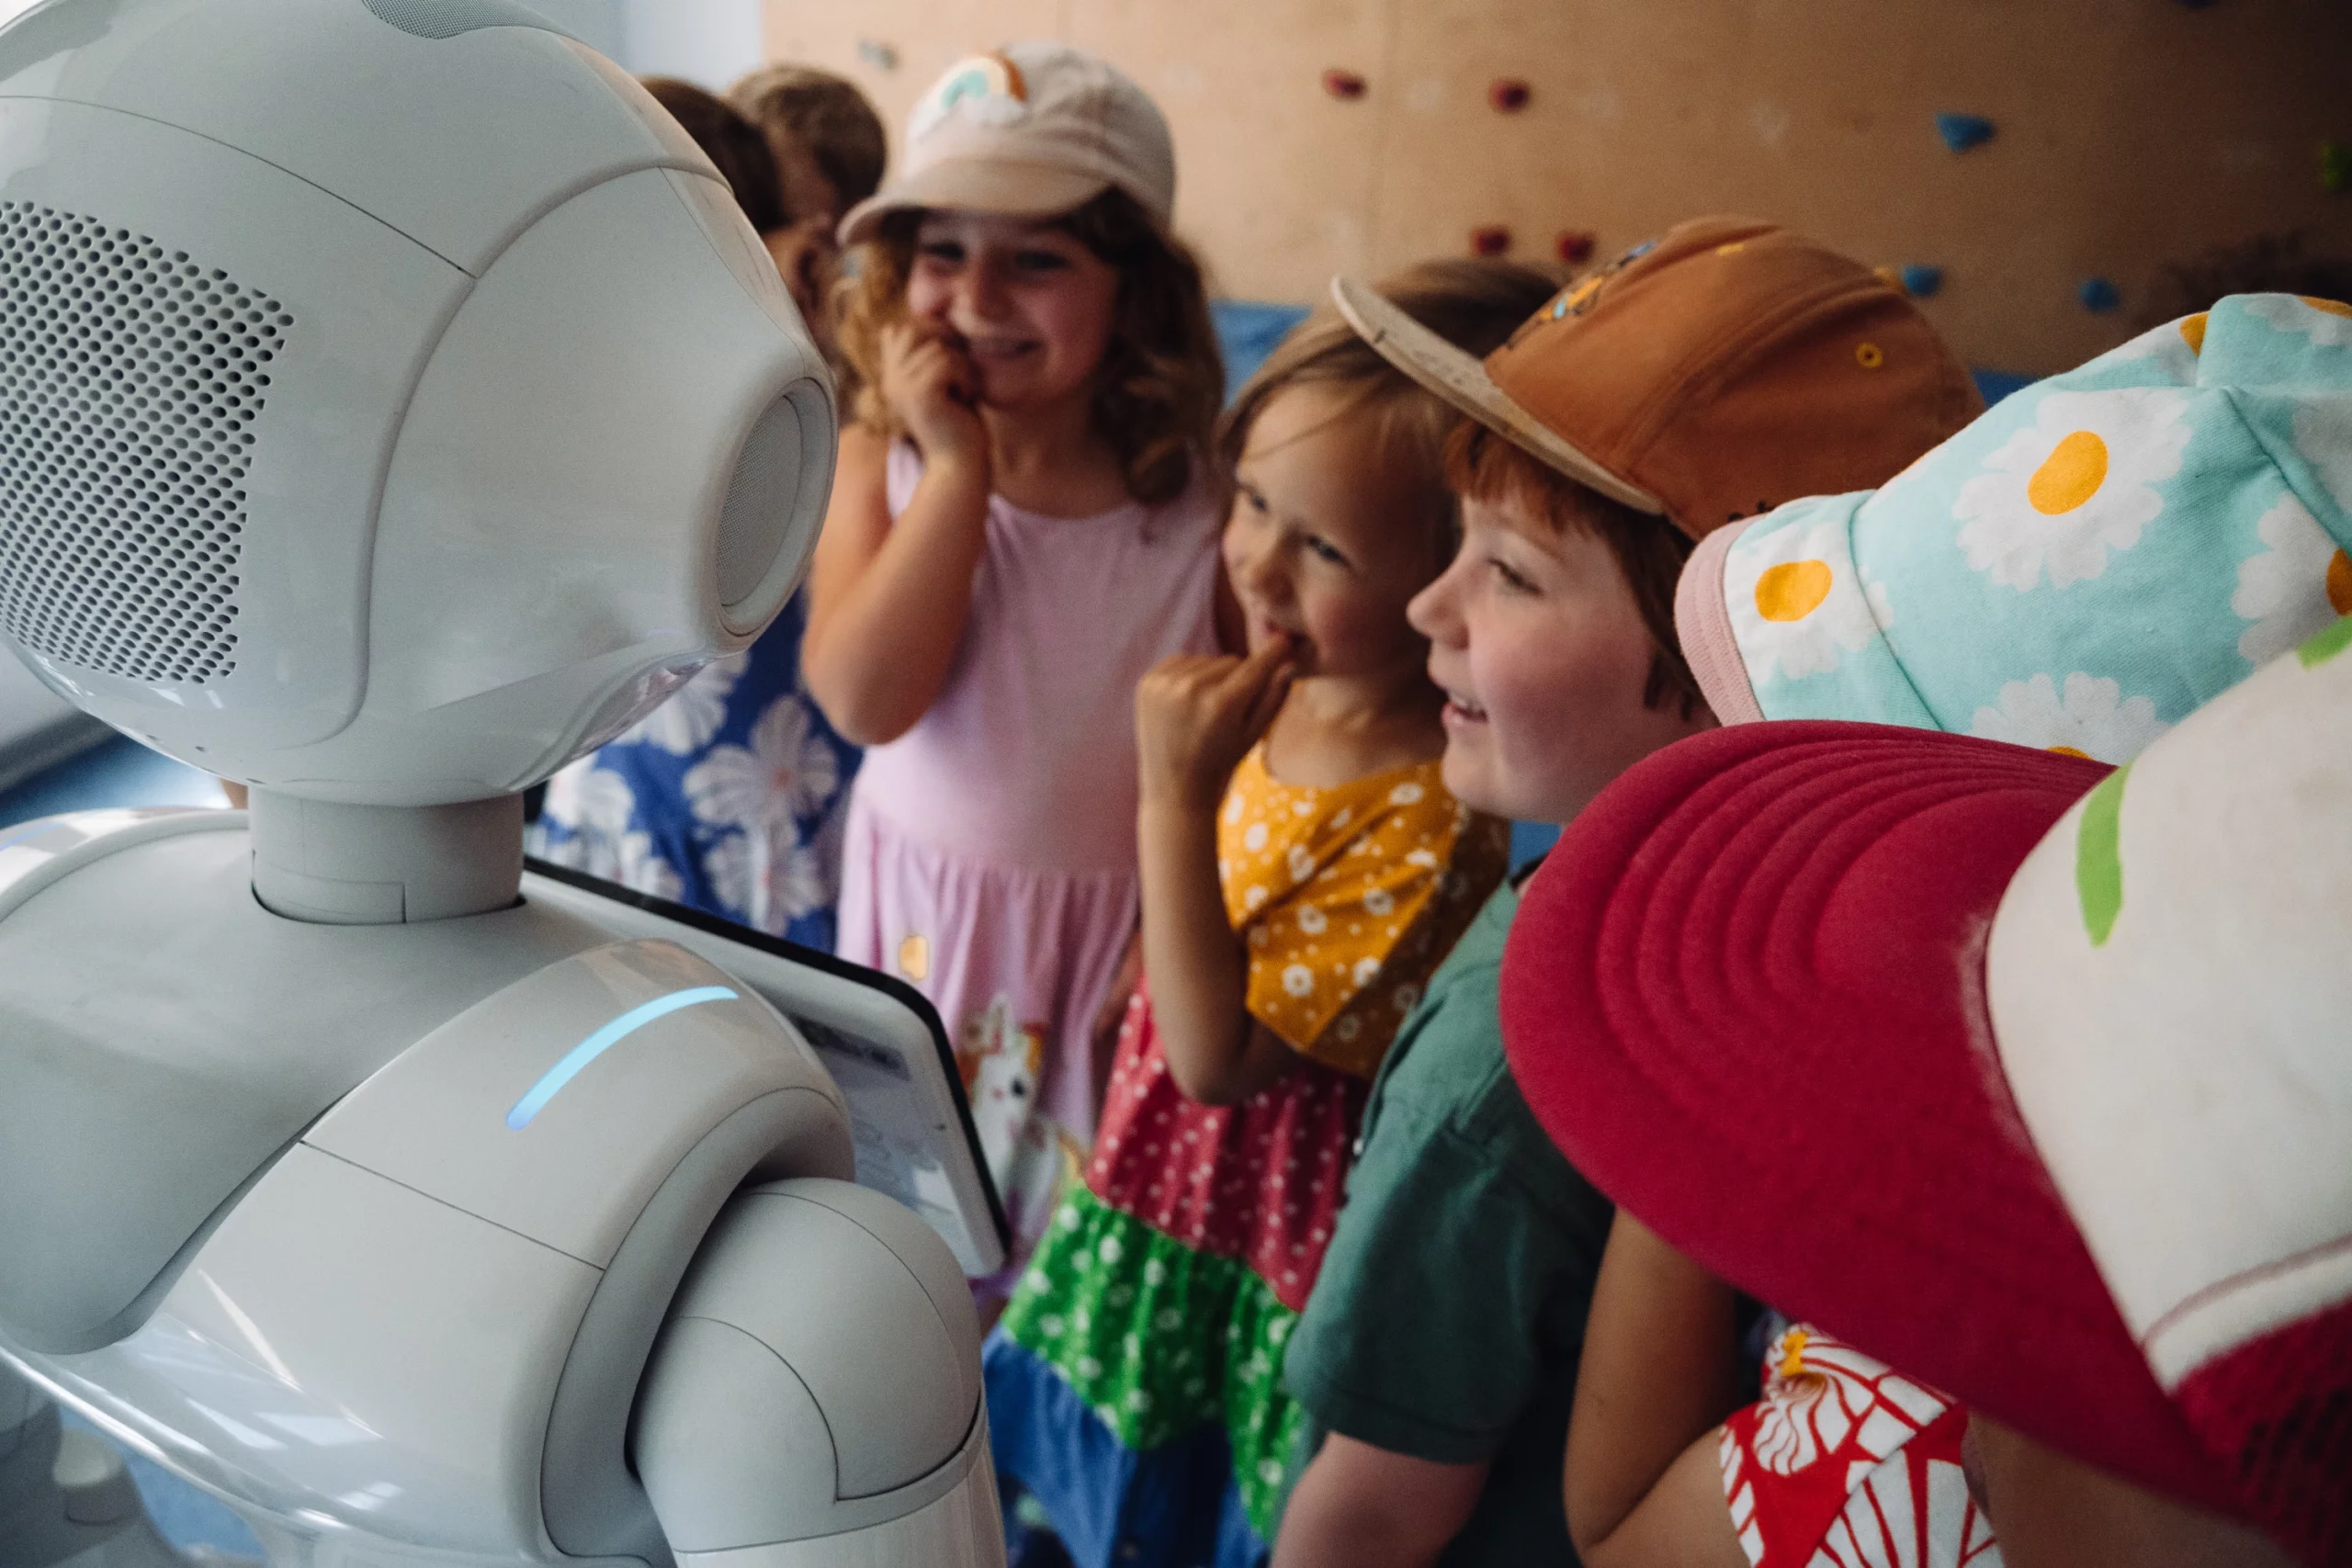 A group of kids interacts happily with the humanoid robot Pepper.